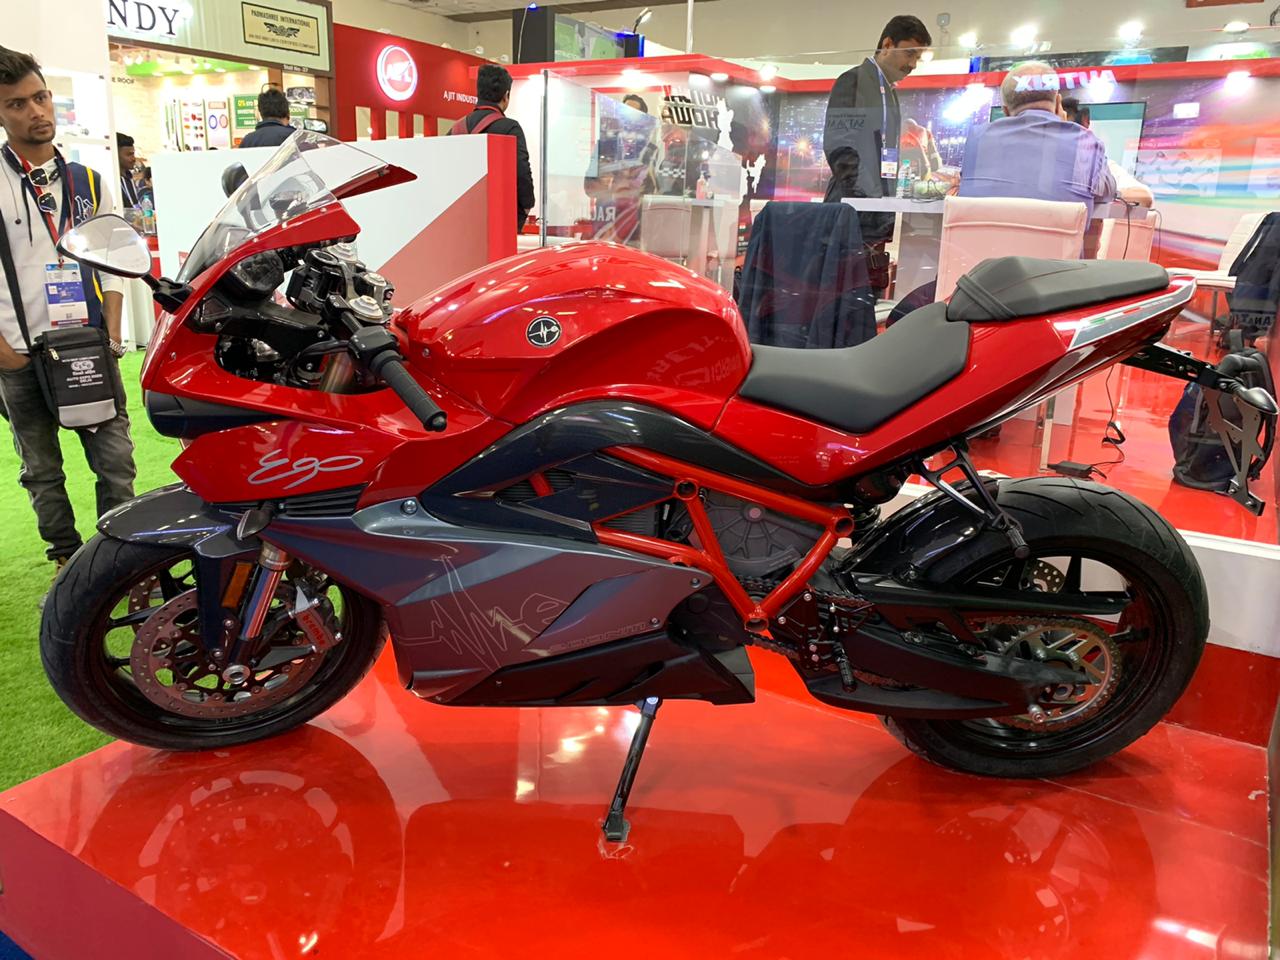 Energica Ego in India at the Auto Components Show 2020